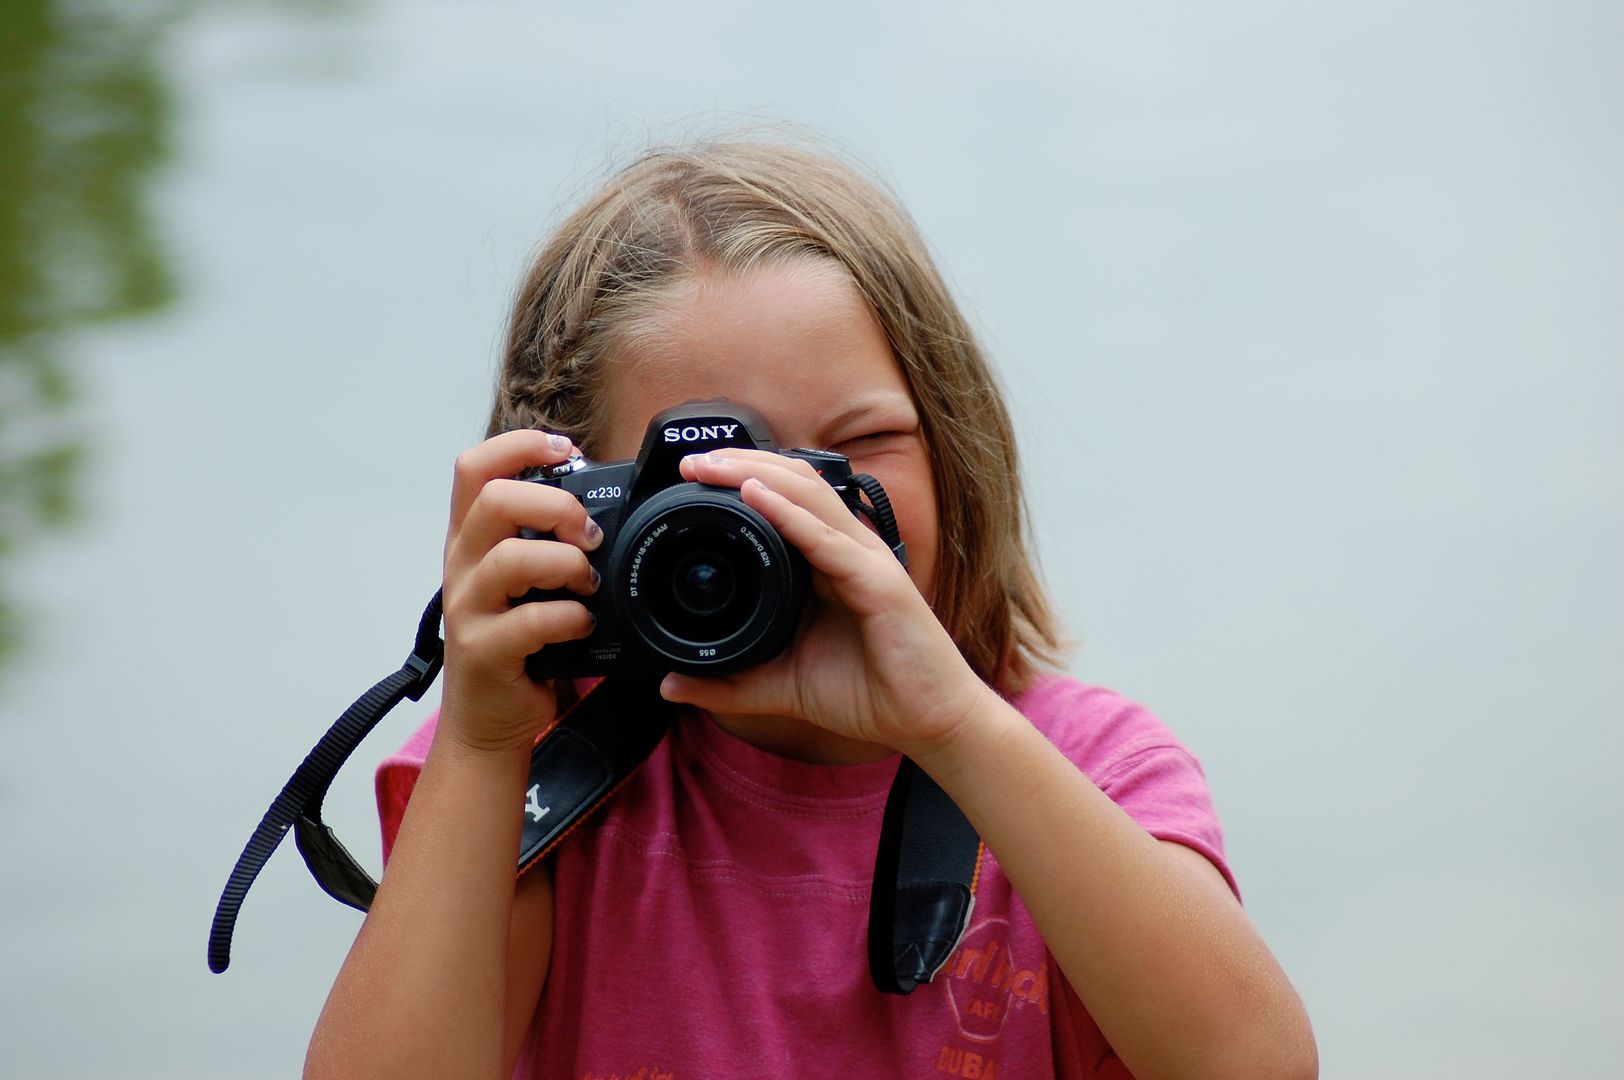 Tips for trapping your kids' souls! With a camera!